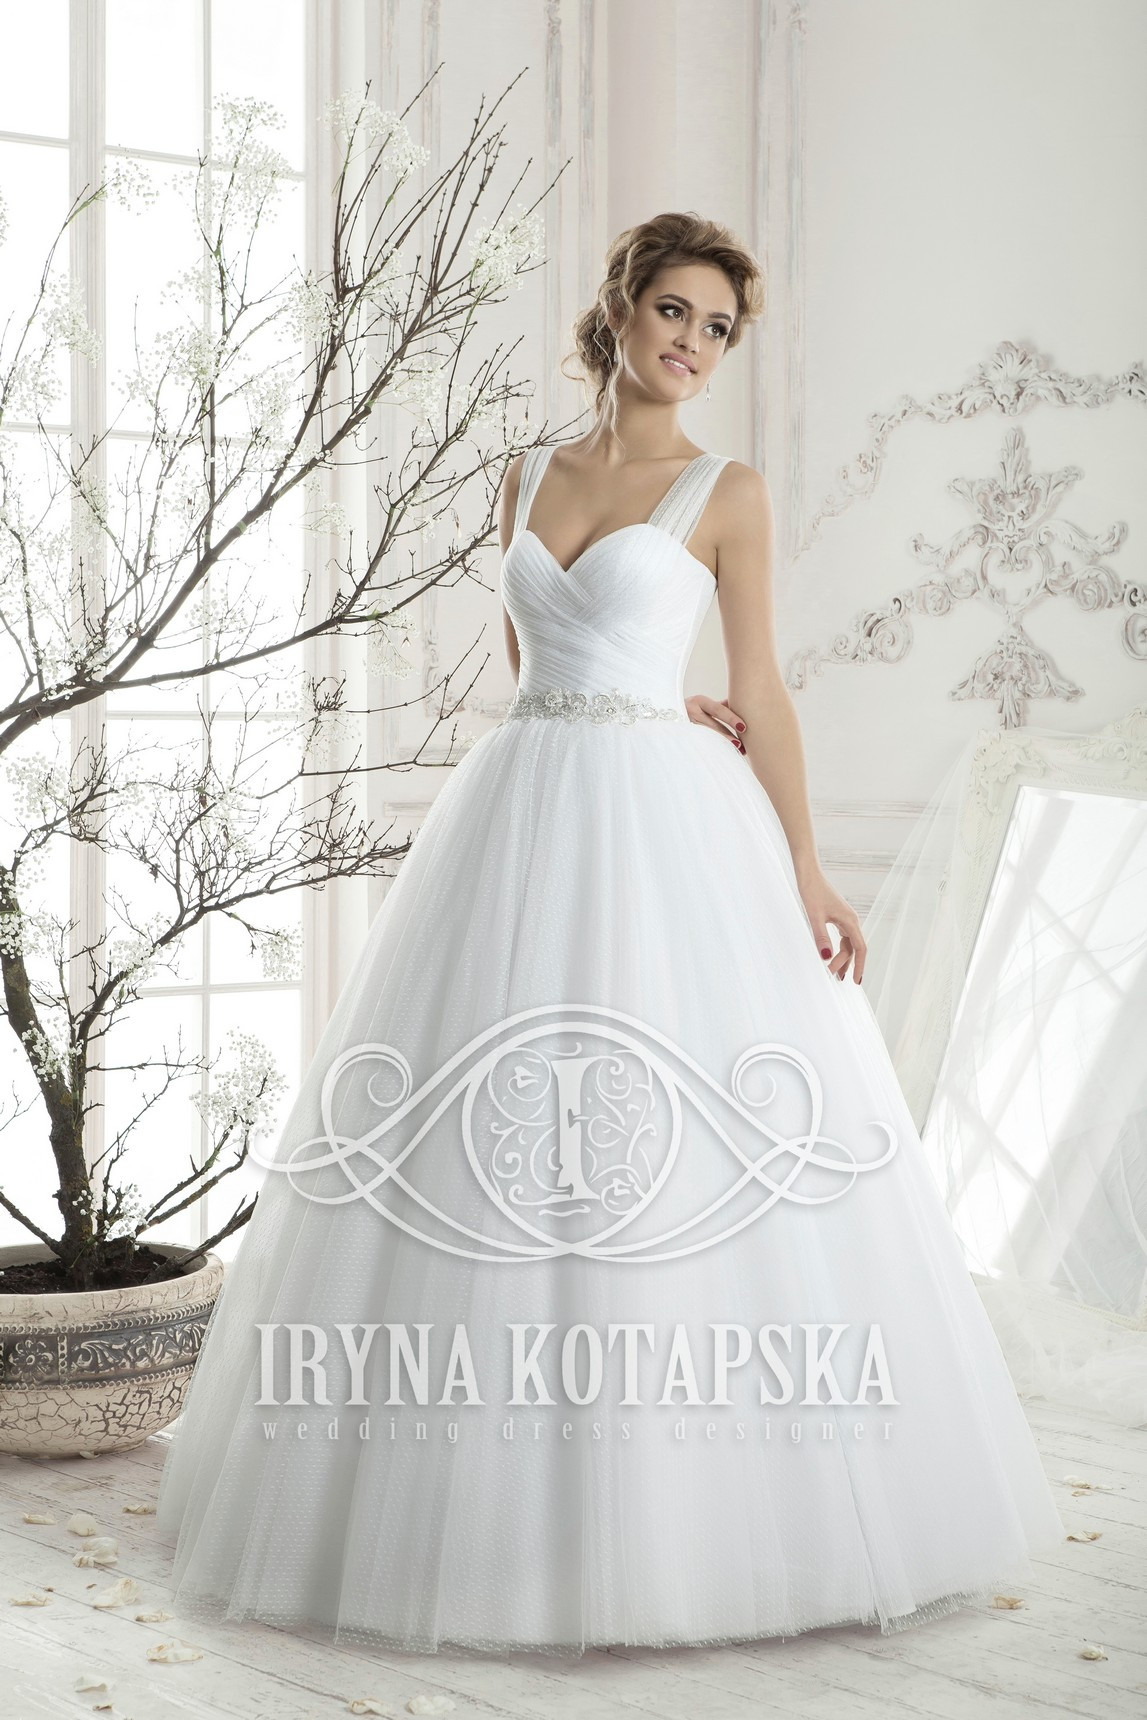 Wedding Gown Stores Near Me
 A stylish wedding dress performed in light tulle bridal